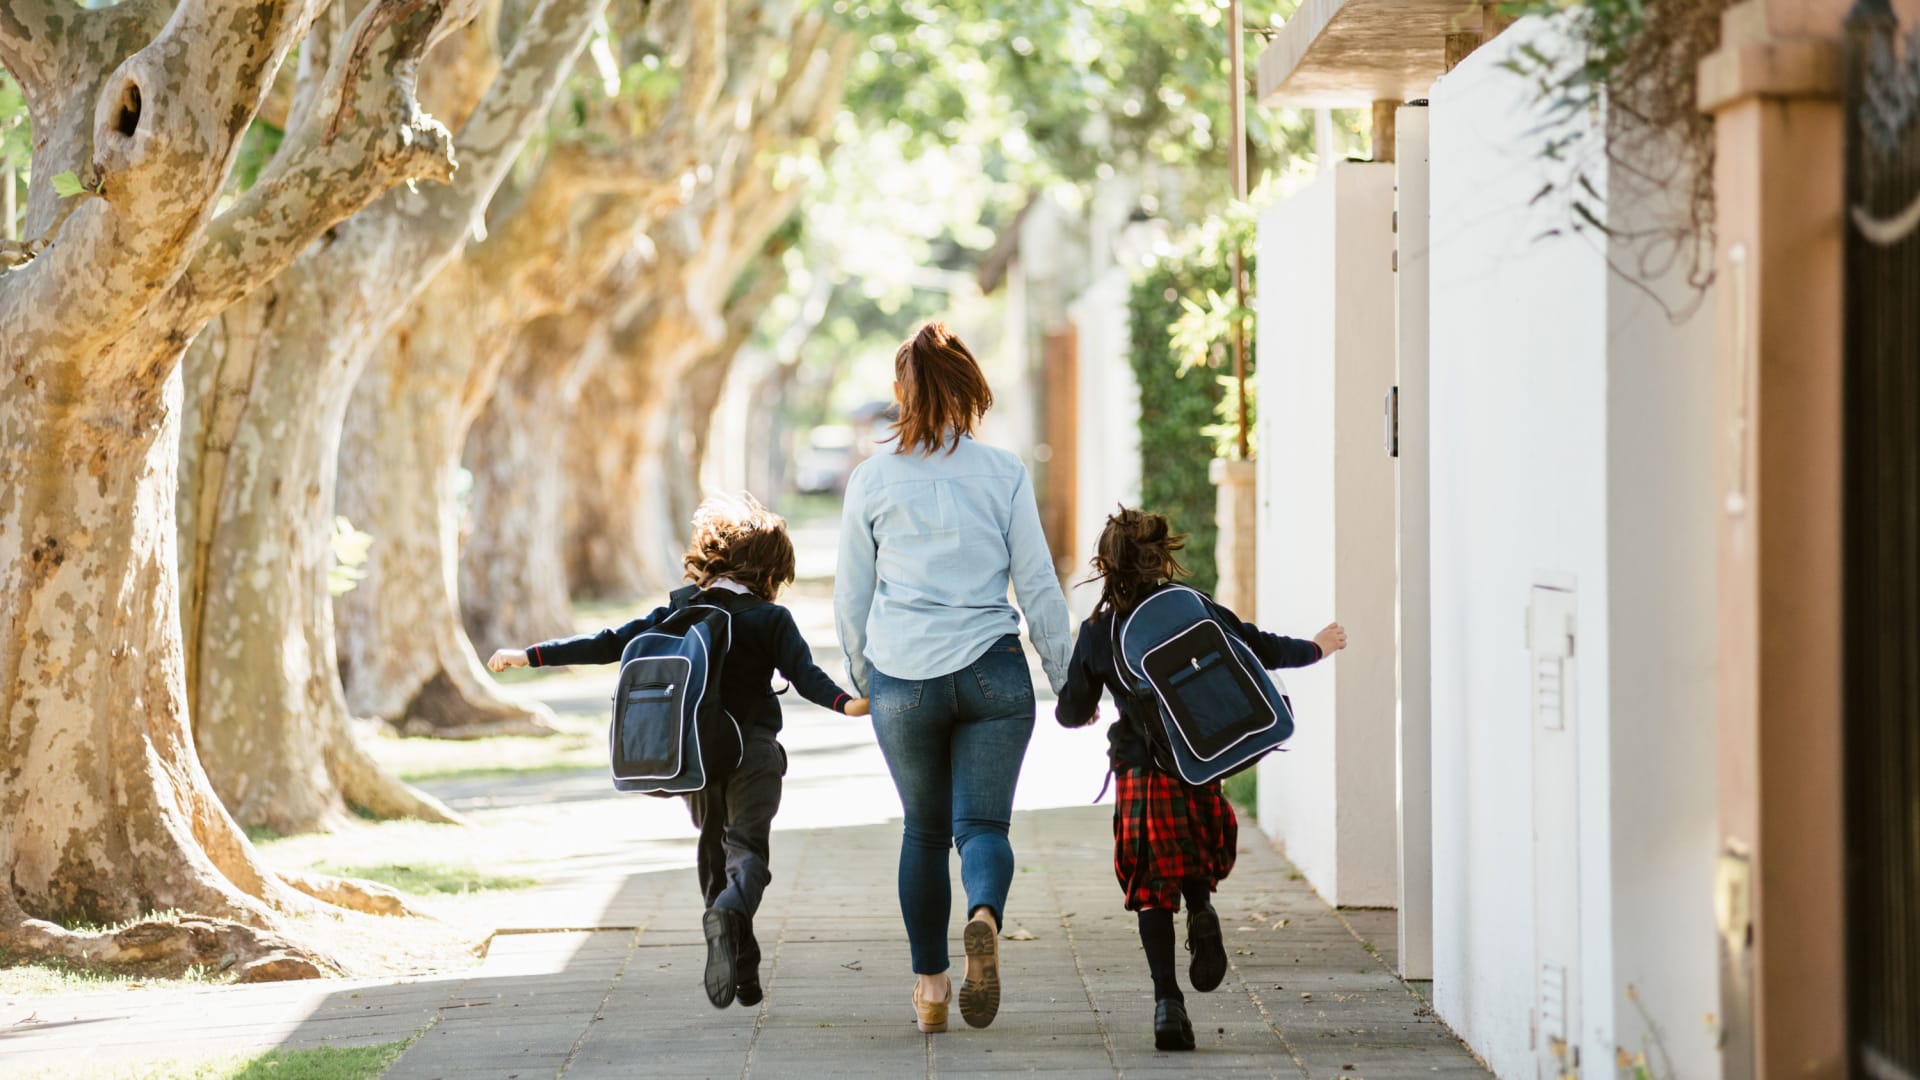 This Is the 1 Factor That Matters Most for Raising Successful Kids, According to New Research